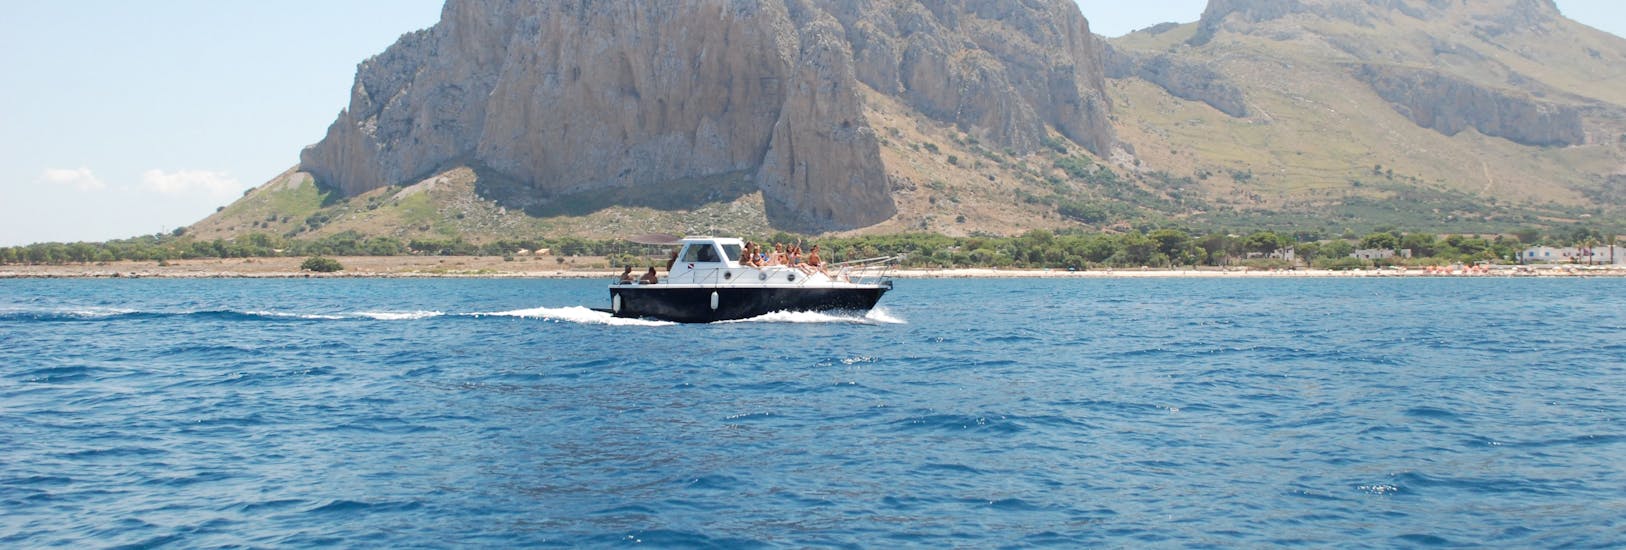 Primero's boat navigating in front of the promontory of San Vito Lo Capo during the Private Boat Trip around San Vito Lo Capo with Lunch and Apéritif with Primero.